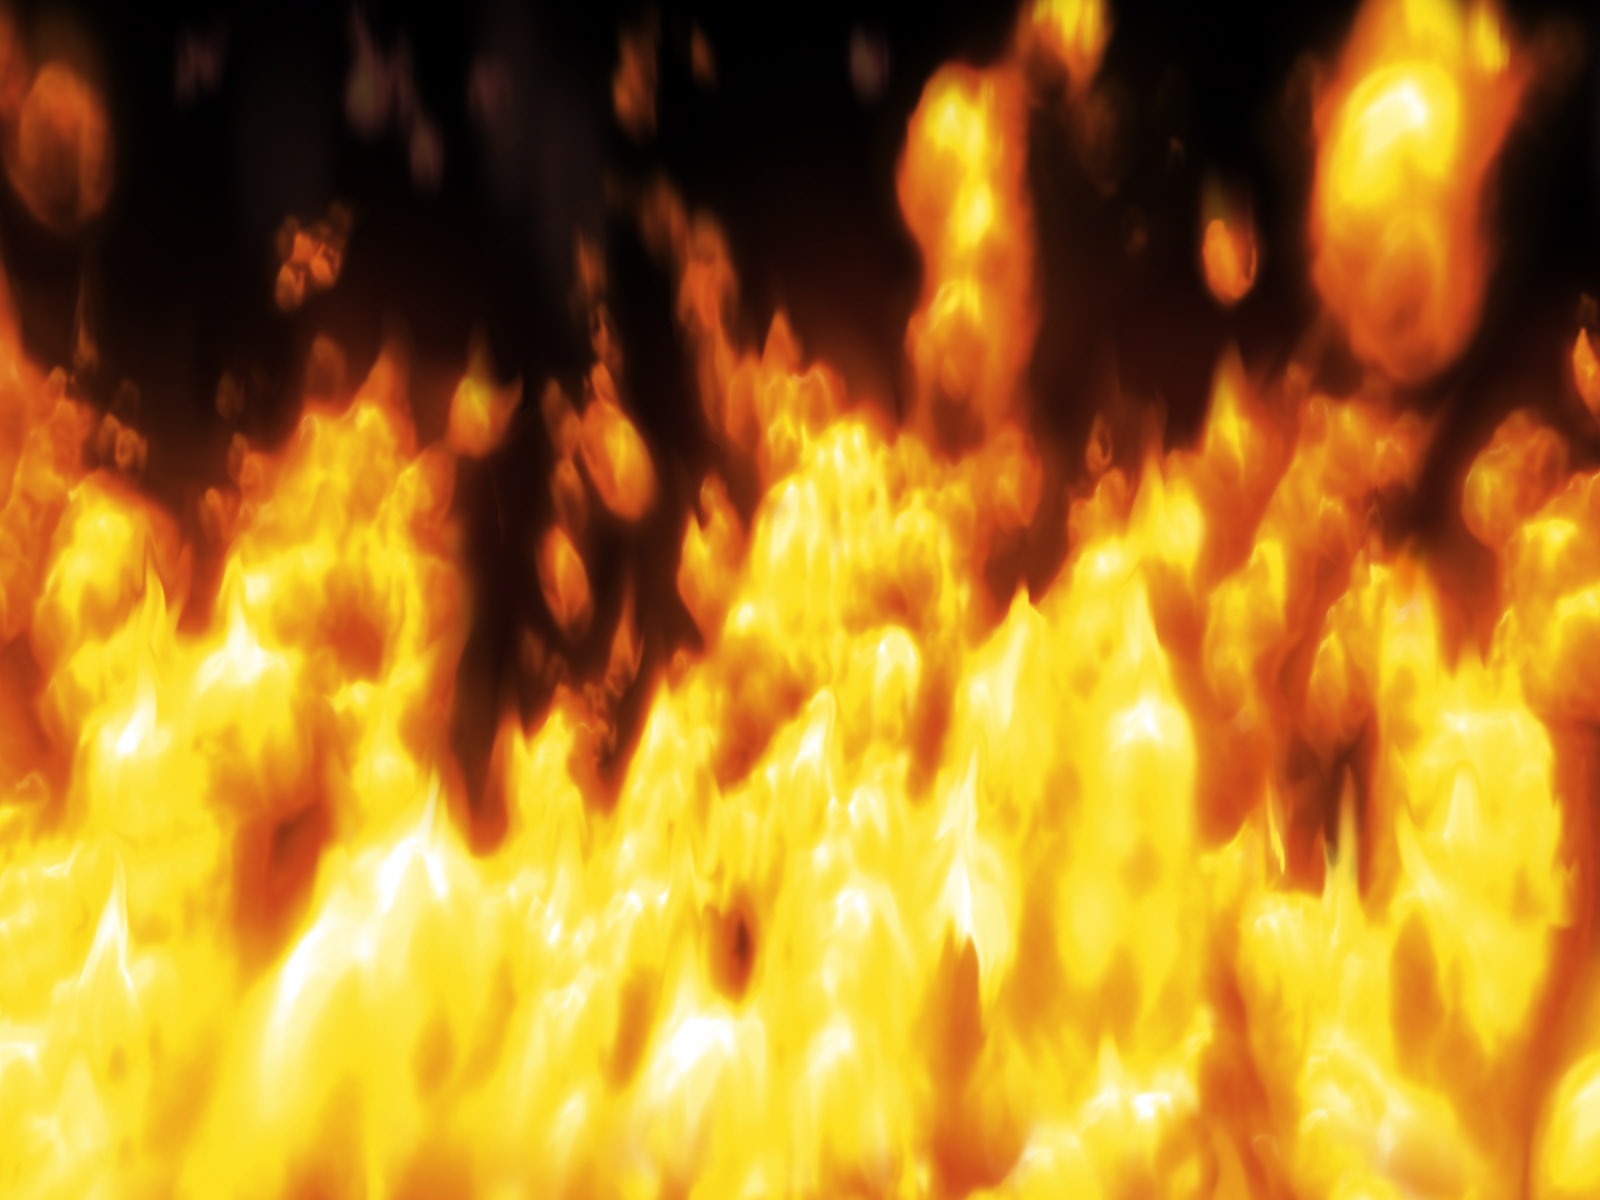 Flame Feature HD Wallpaper #10 - 1600x1200